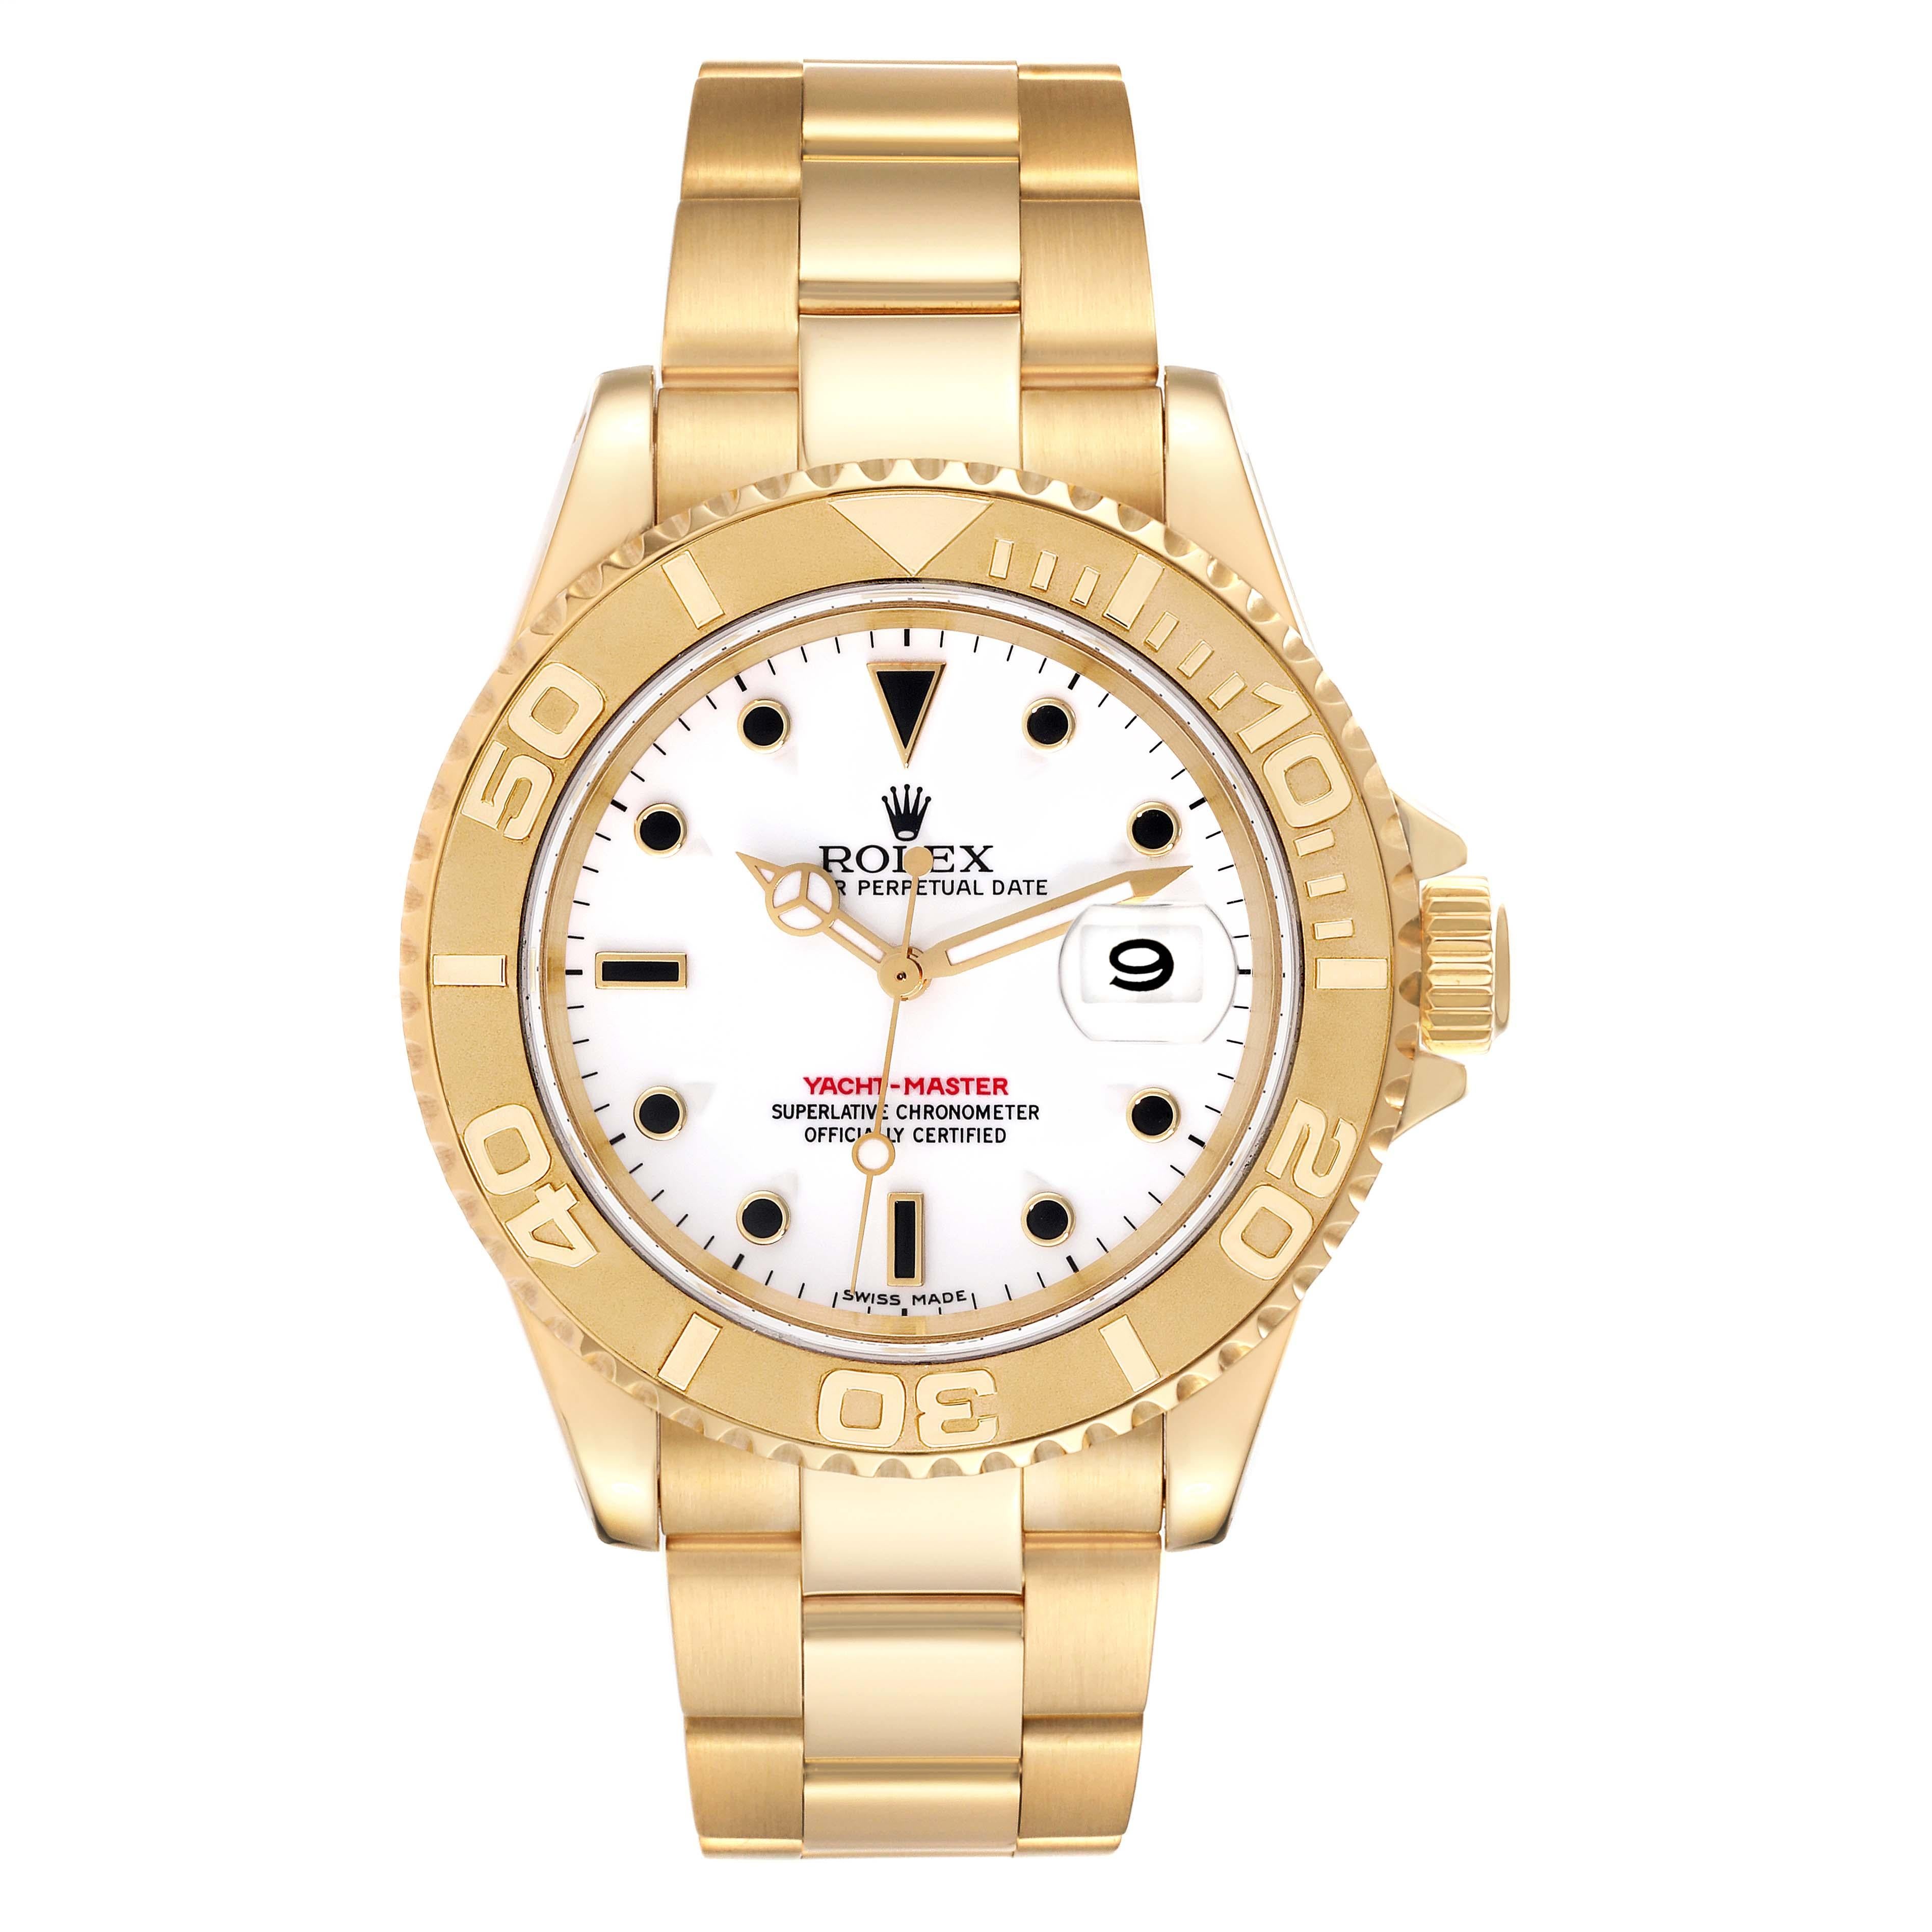 Rolex Yachtmaster 40mm Yellow Gold White Dial Mens Watch 16628. Officially certified chronometer automatic self-winding movement. Rhodium-plated, oeil-de-perdrix decoration, straight-line lever escapement, free sprung monometallic balance adjusted